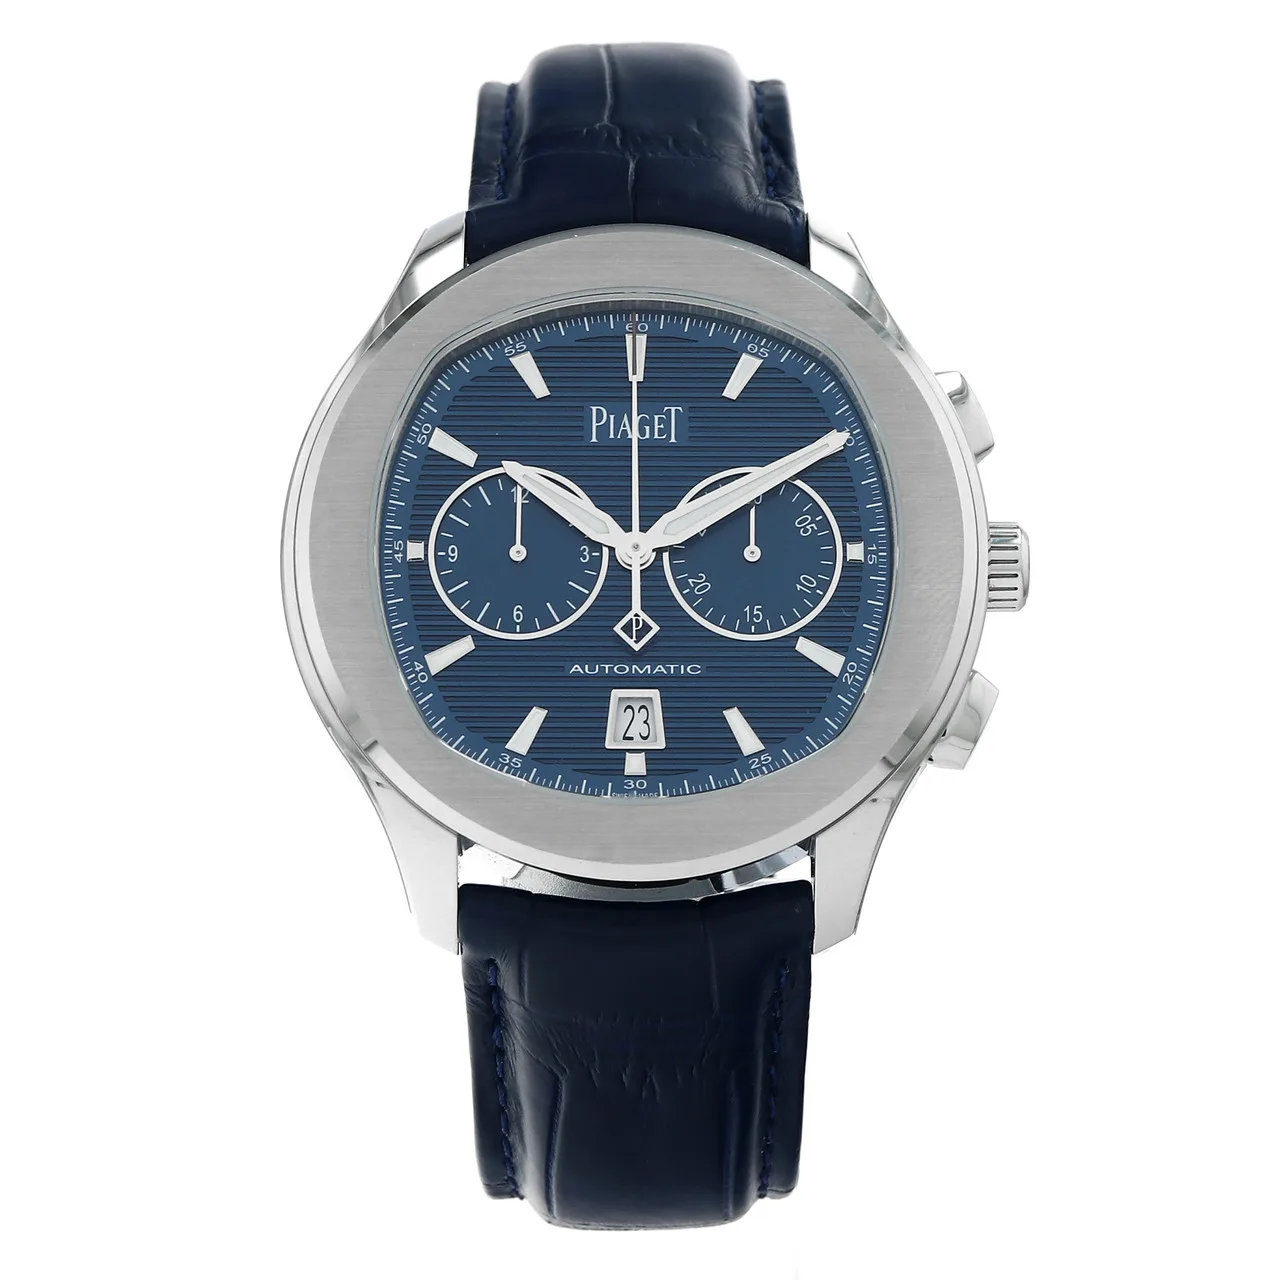 2022 Piaget Polo S Steel / Blue / Strap G0A43002  Listing Image 1